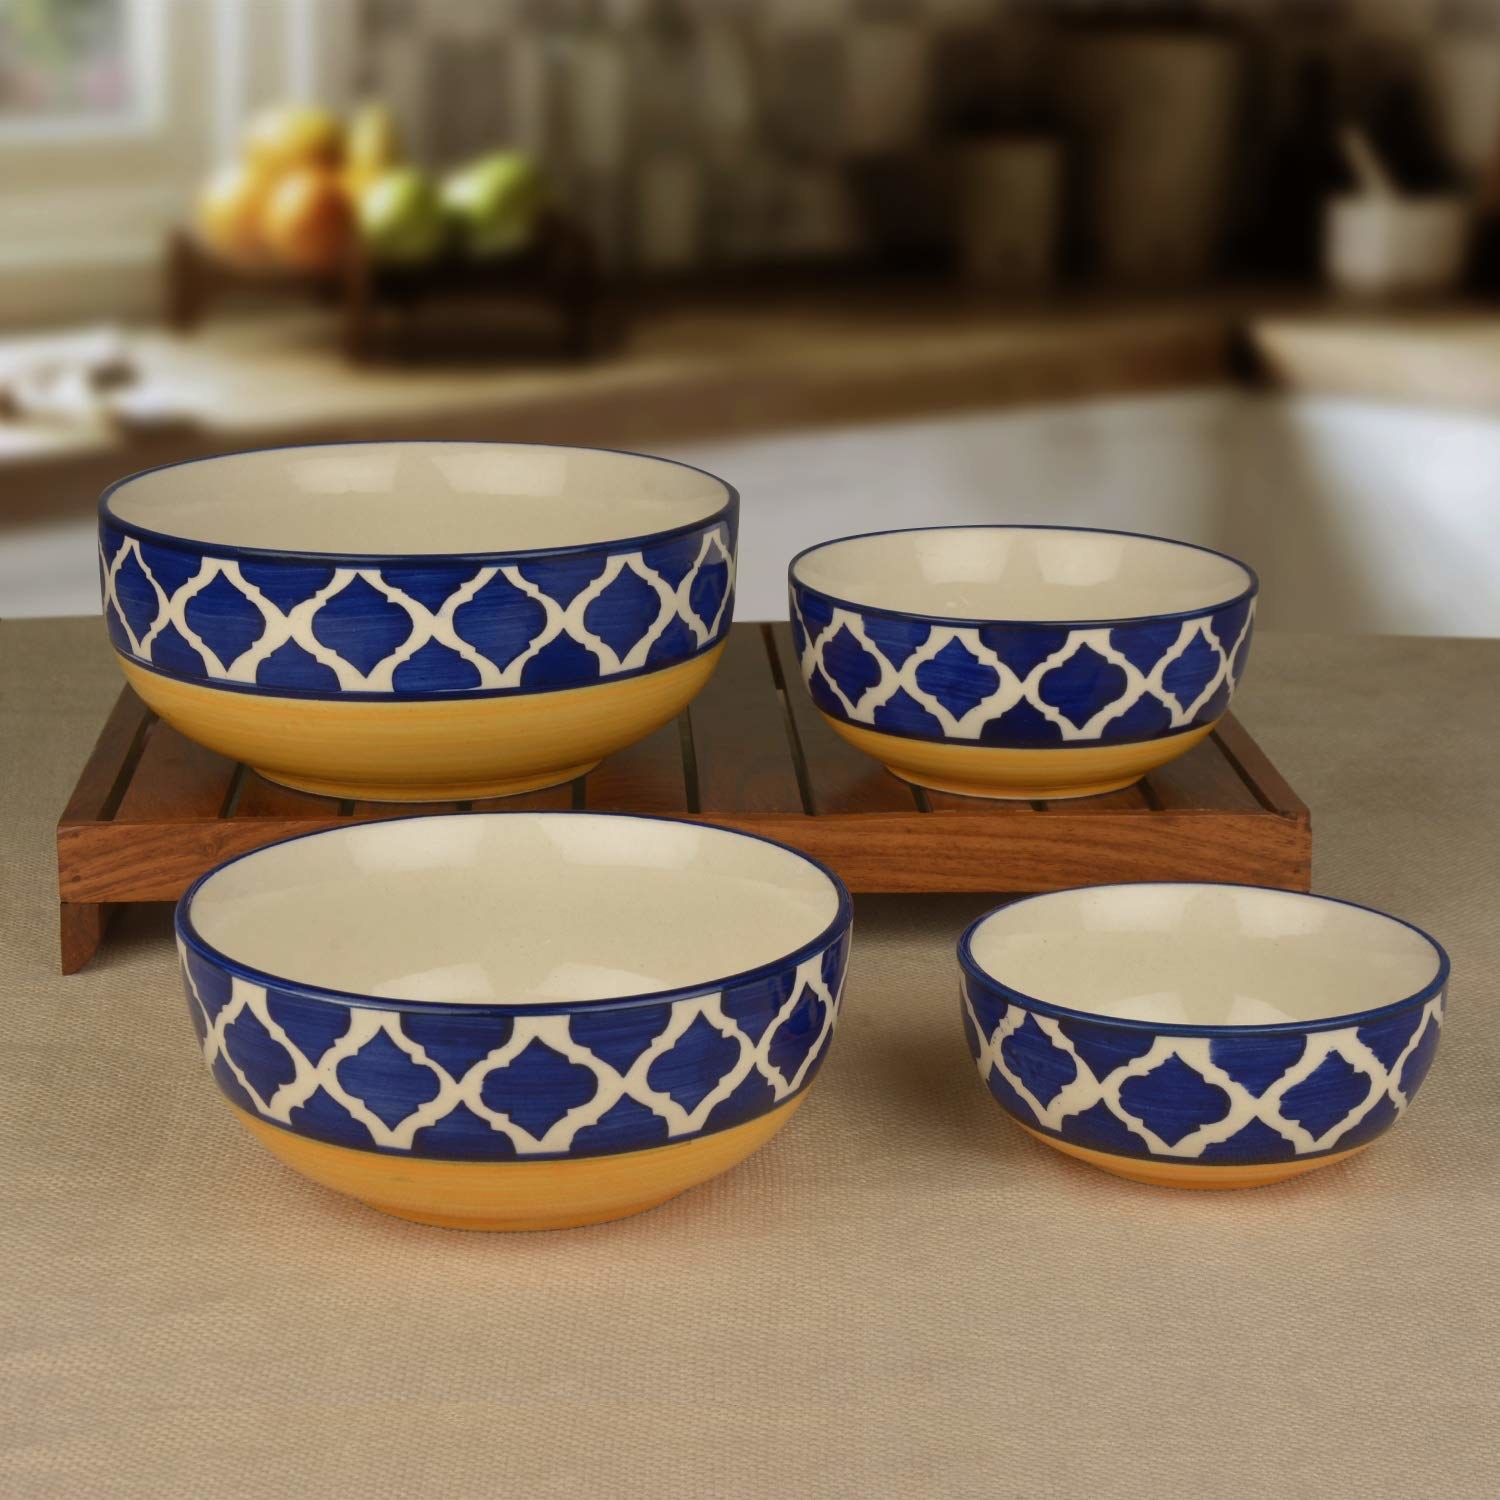 Four ceramic bowls on a table with a blue and yellow design